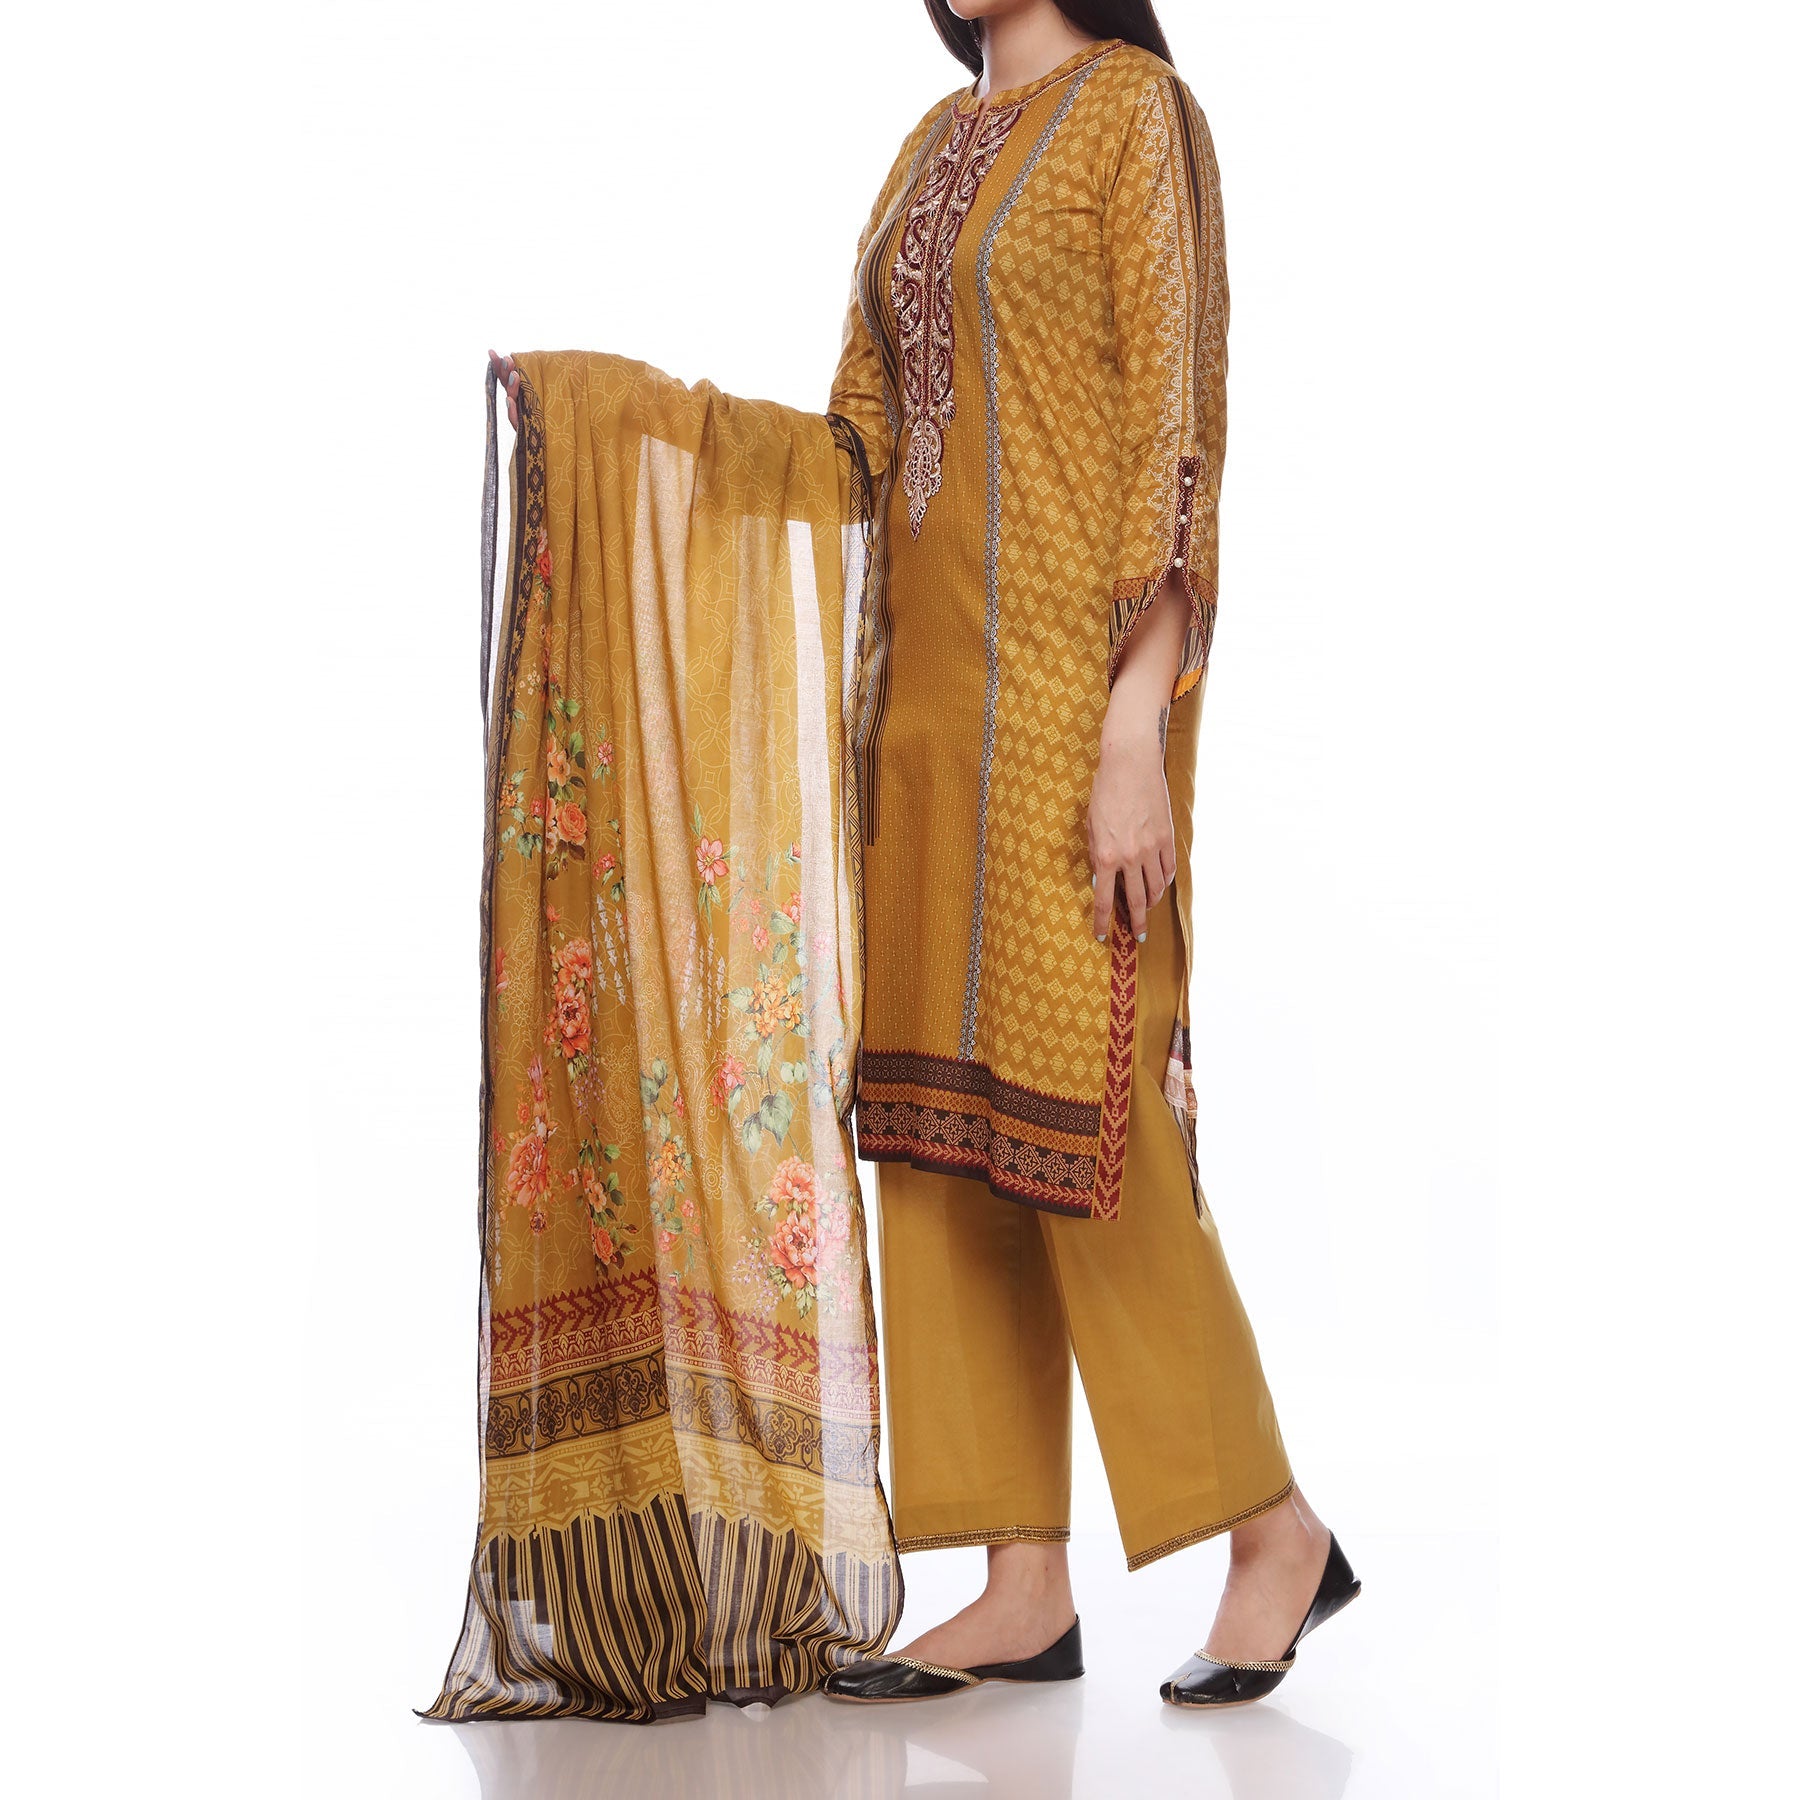 Digital Printed Lawn Shirt With Embroiderd Neck Line
Digital Printed Lawn Duppata
Plain Dyed Cambric Trousers